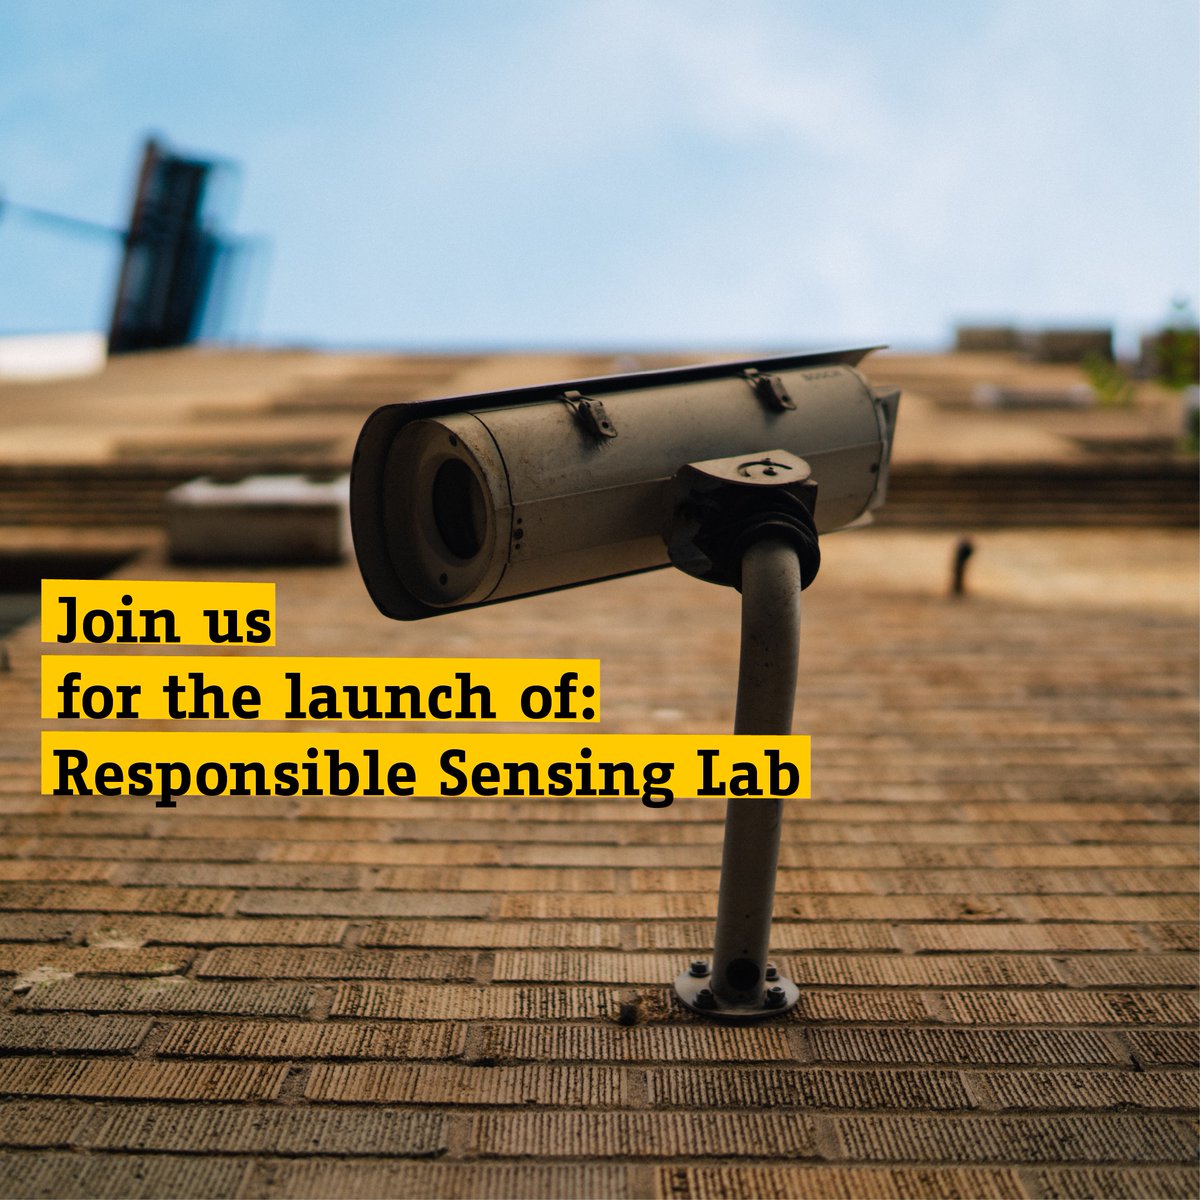 What does a responsible #digital city look like? January 28 marks the launch of our Responsible Sensing Lab! Join our interactive online event, hear from speakers like @anthonymobile, Deputy Mayor @touriameliani and sign up for workshops: ams-institute.org/launchRSL #design #data #ai